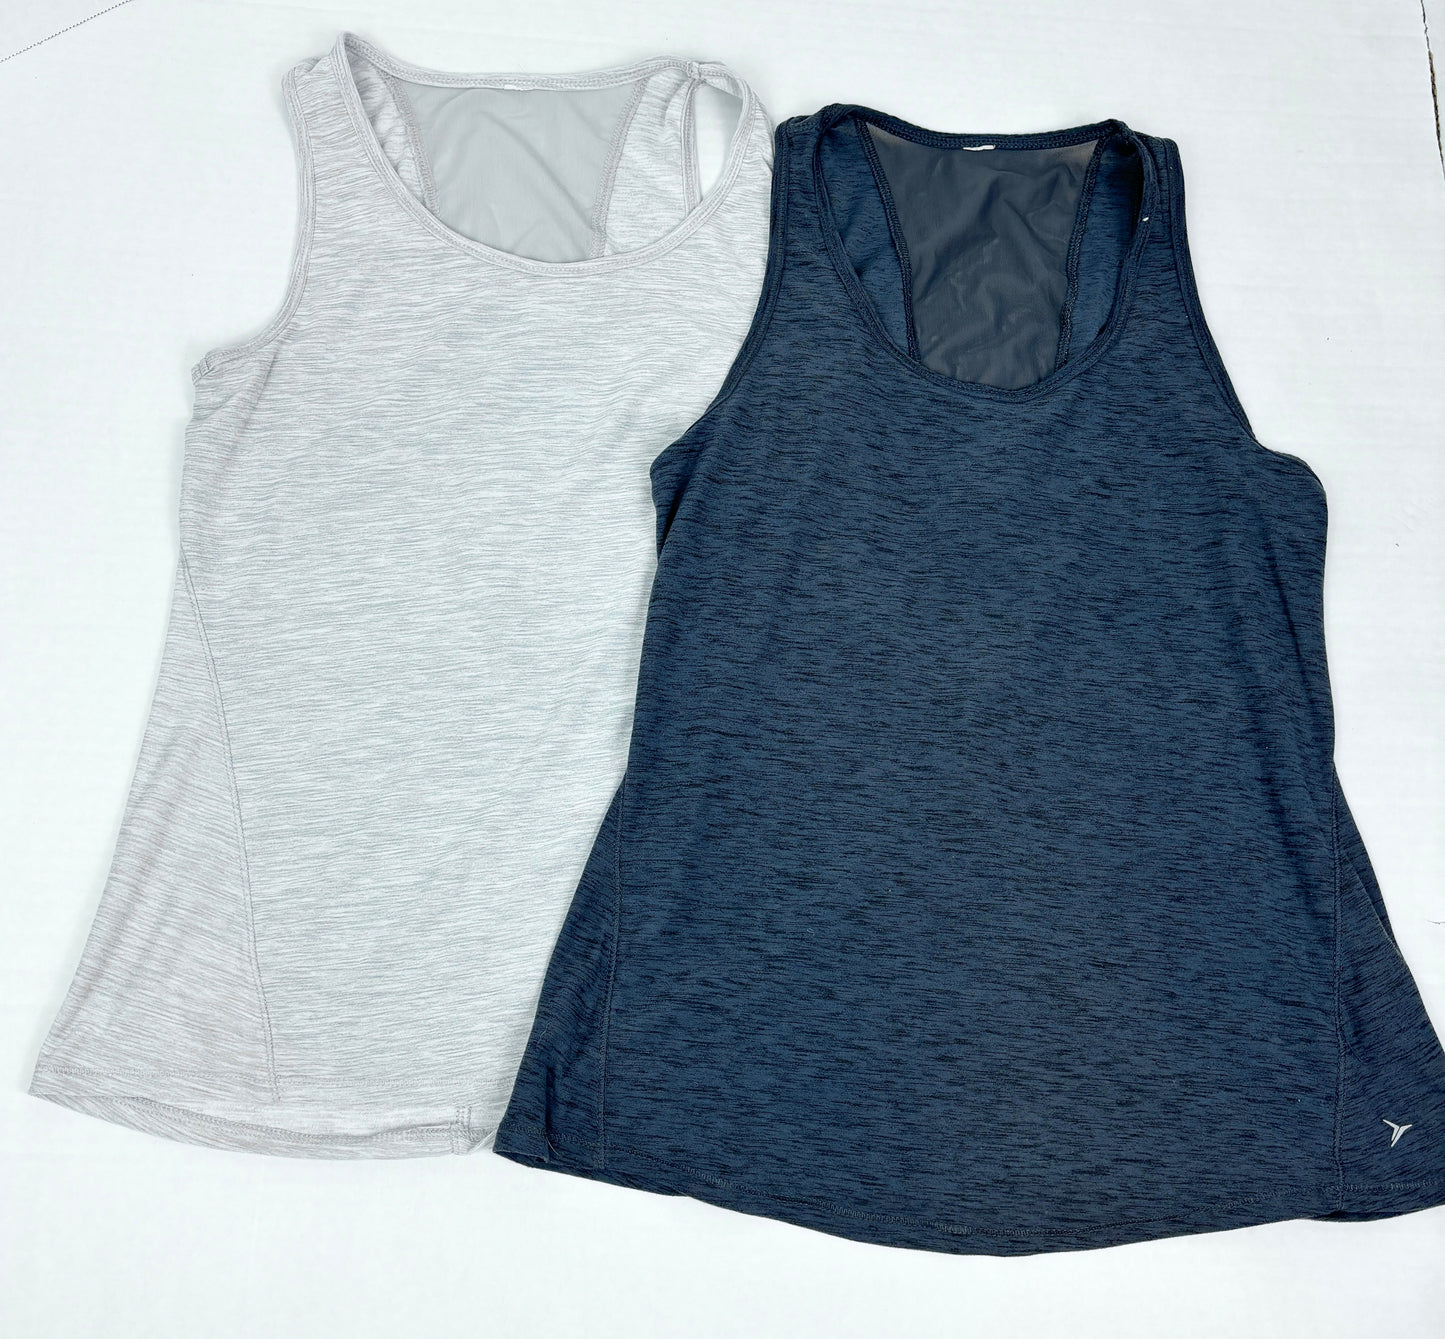 Women Small Old Navy Active Gray Workout Tank Tops